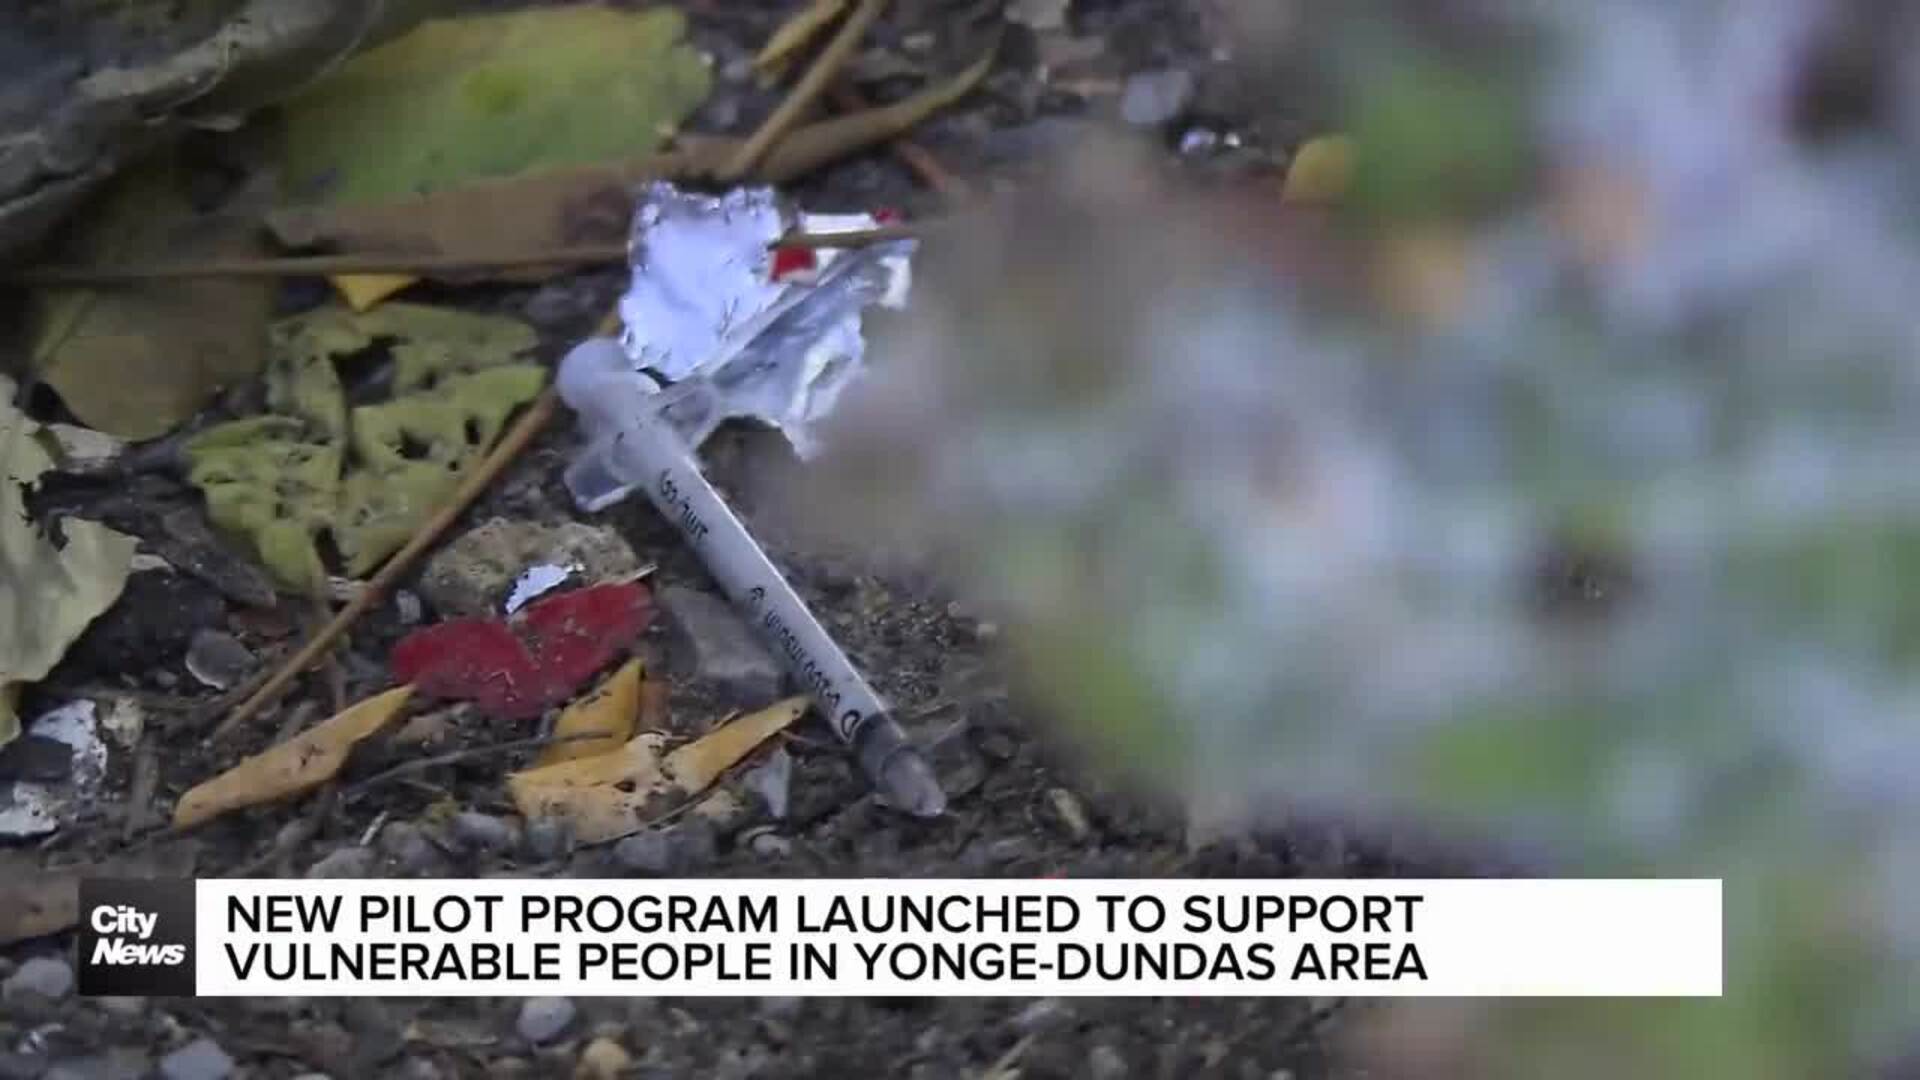 New pilot program launched to support vulnerable people in Yonge-Dundas area